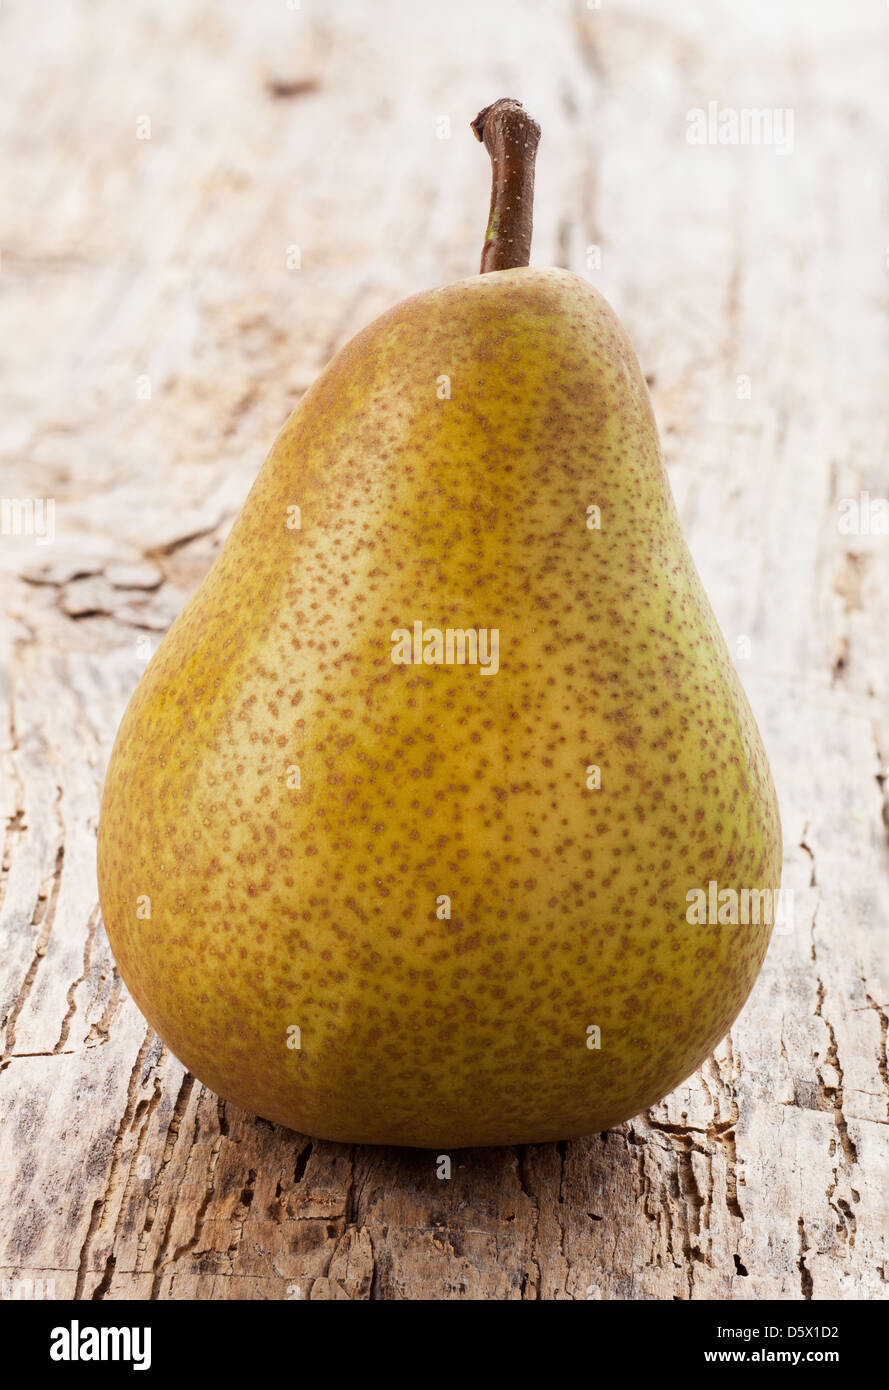 green pear on a wooden table Stock Photo